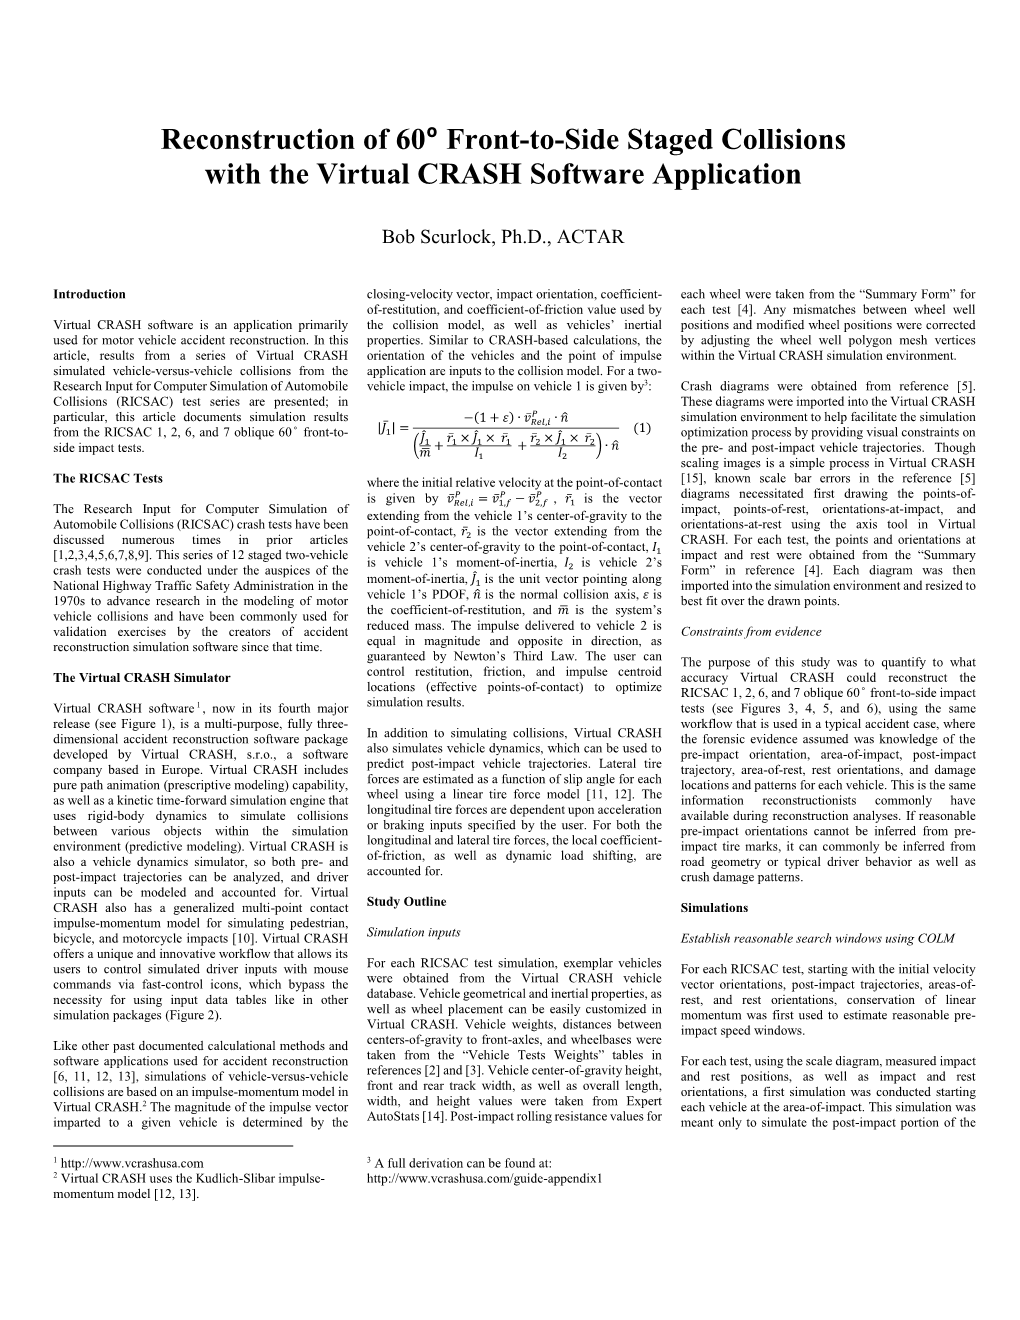 Reconstruction of 60º Front-To-Side Staged Collisions with the Virtual CRASH Software Application